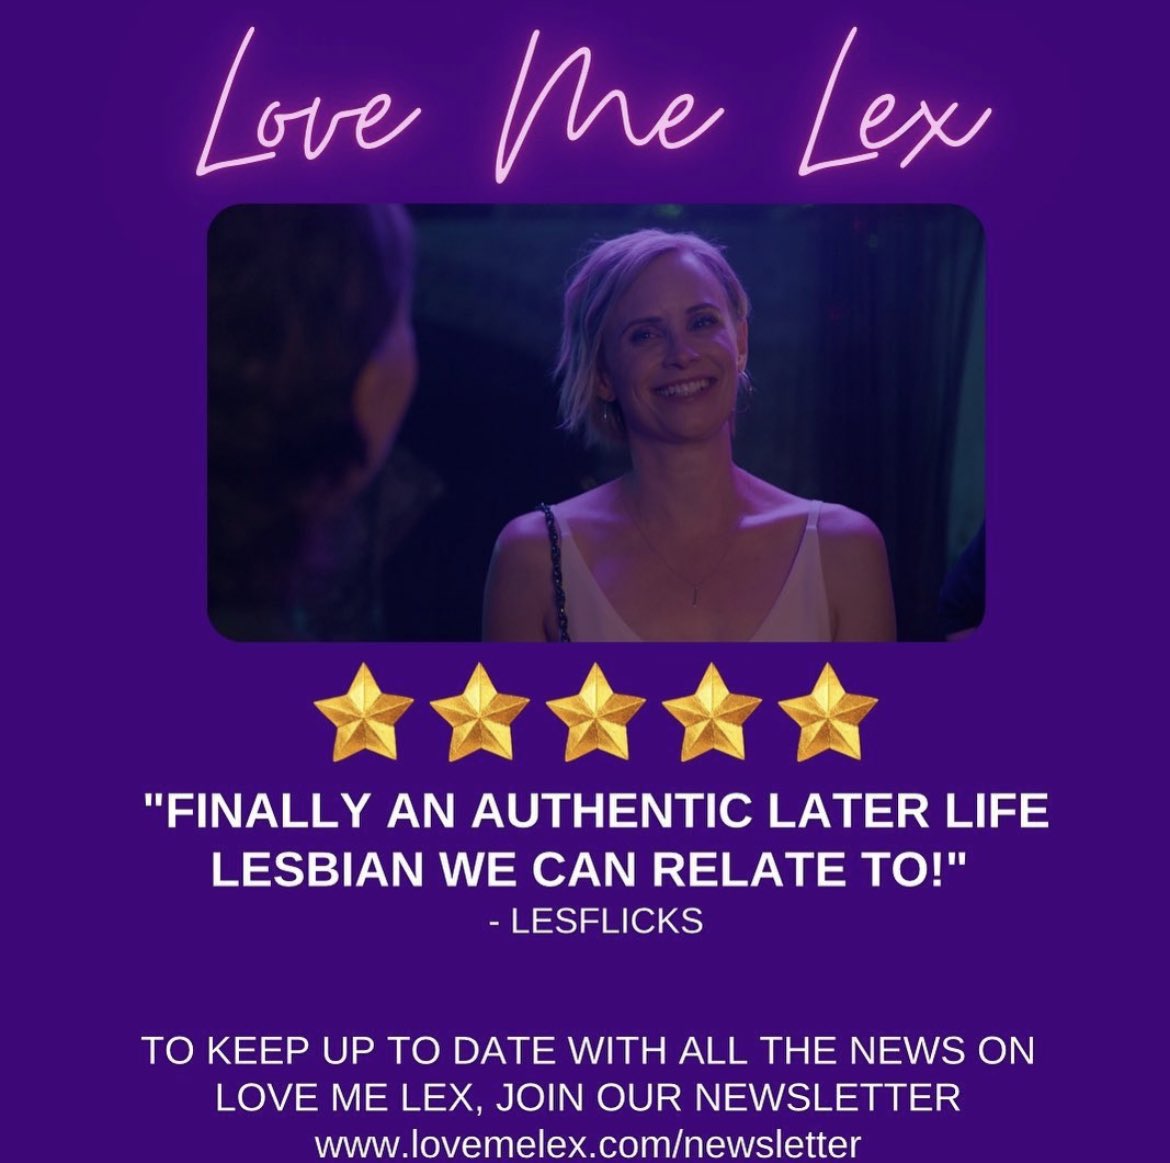 Do you love Aussie TV #lesbian couples? If you’re down for Wentworth’s #fridget and #ballie, and Janet King’s #bianking - then jump on board and watch out for the latest #sapphic series out of Australia! Find us on lovemelex.com
 #teamkat #teammiranda #wlw 🤔😉🌈